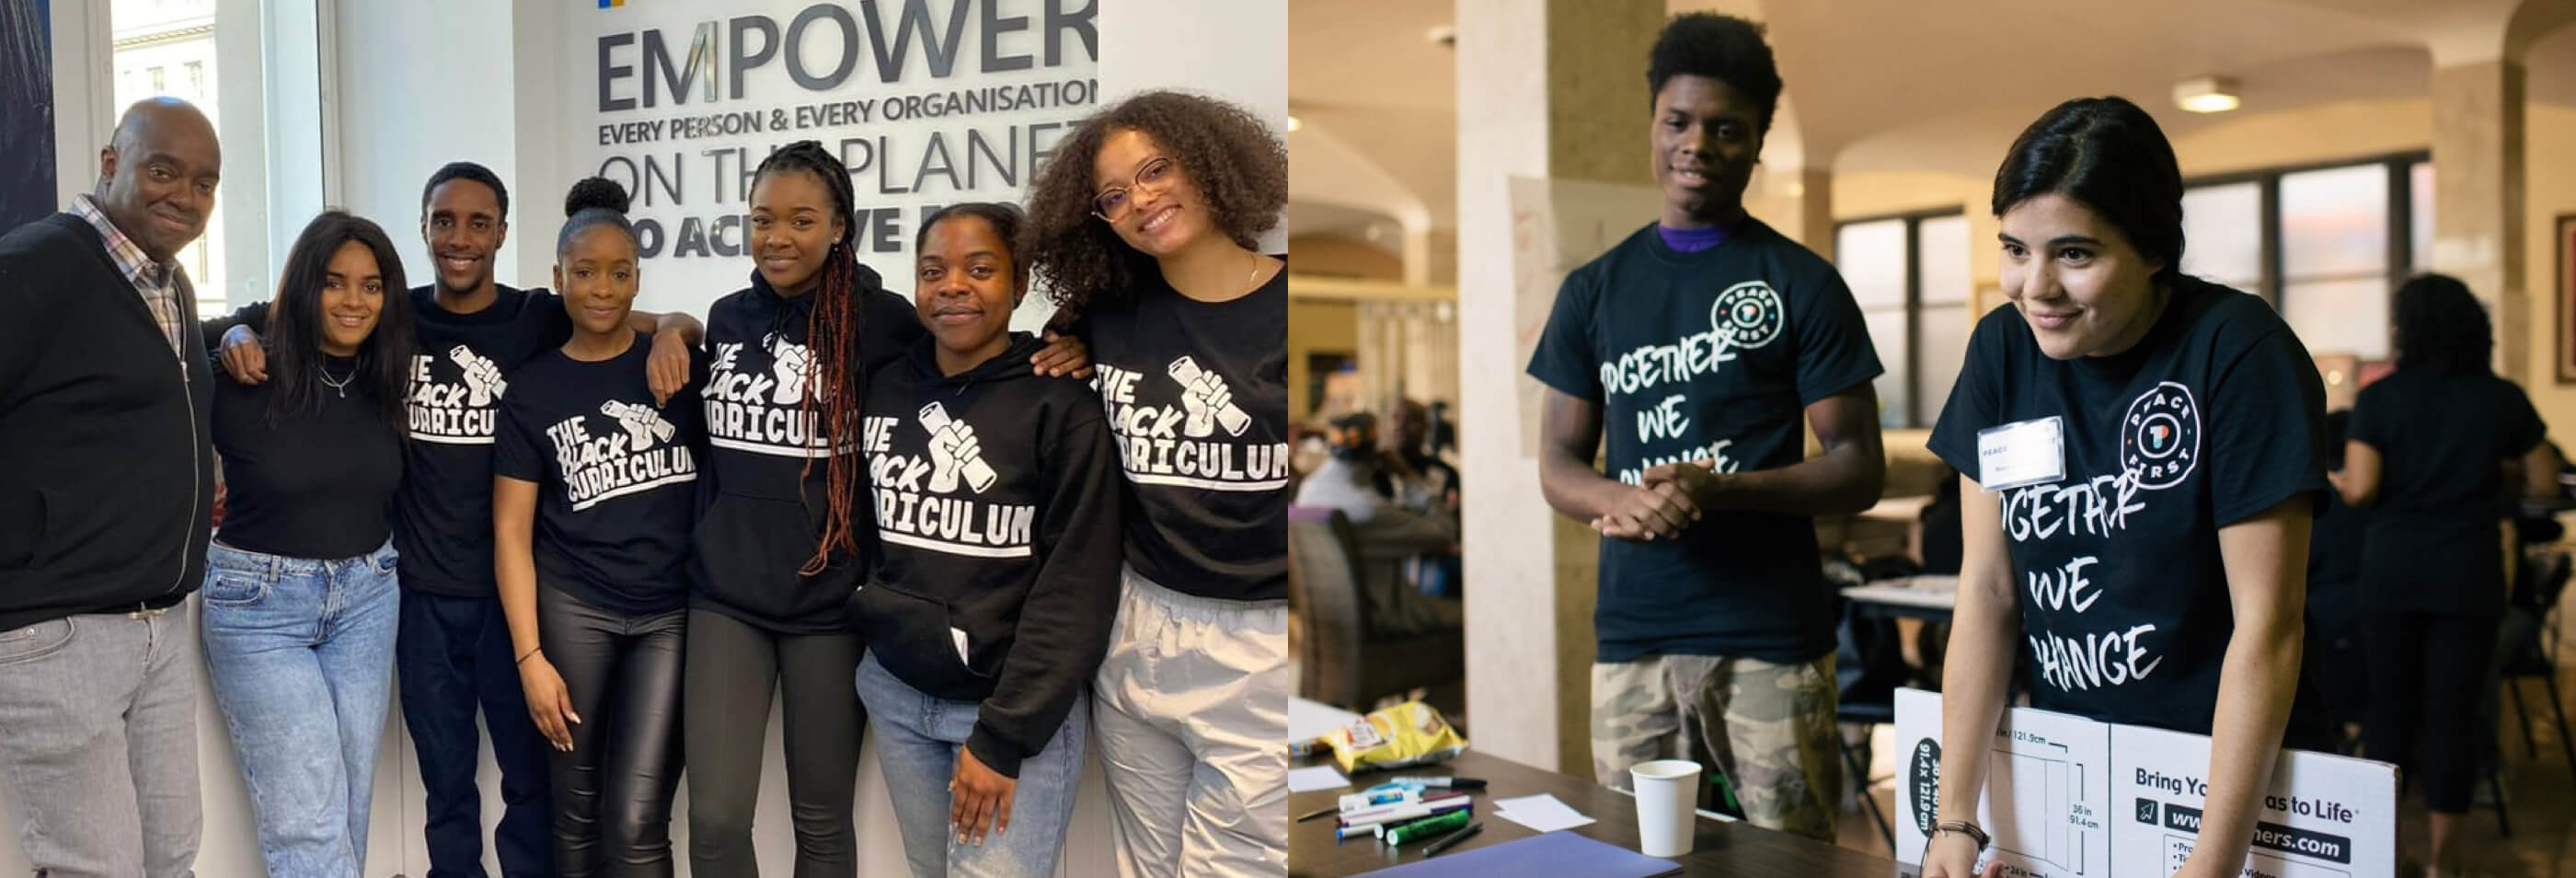 A group of young adults wearing t-shirts that say 'The Black Curriculum' or 'Together we Change'.